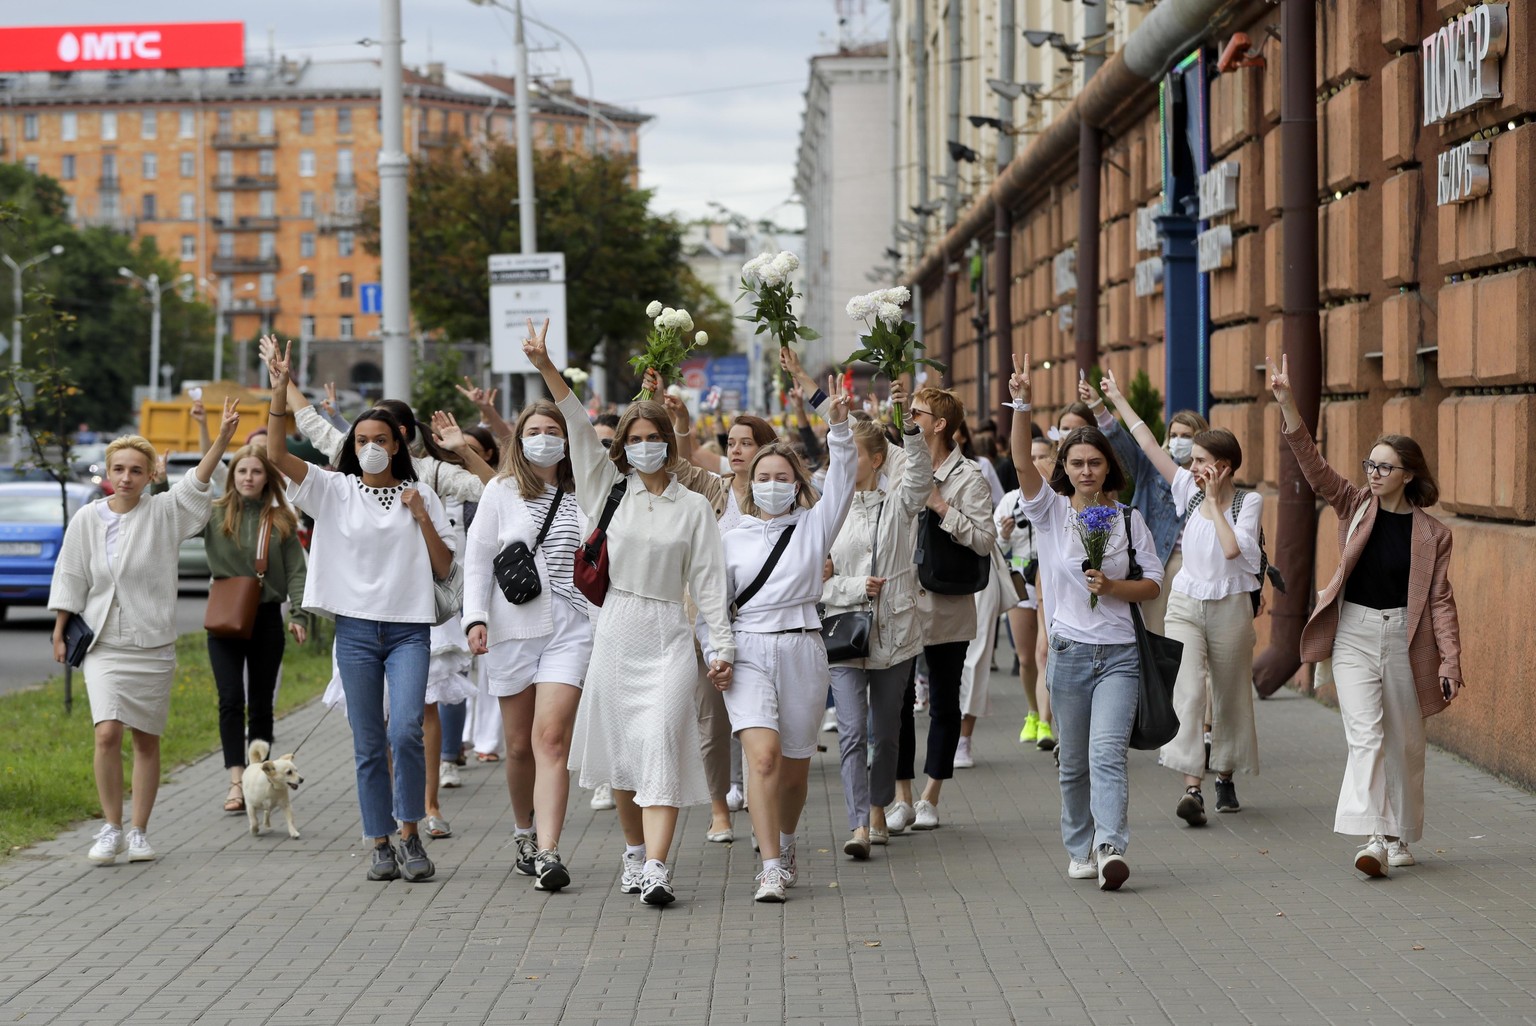 About 200 women march in solidarity with protesters injured in the latest rallies against the results of the country's presidential election in Minsk, Belarus, Wednesday, Aug. 12, 2020. Belarus offici ...